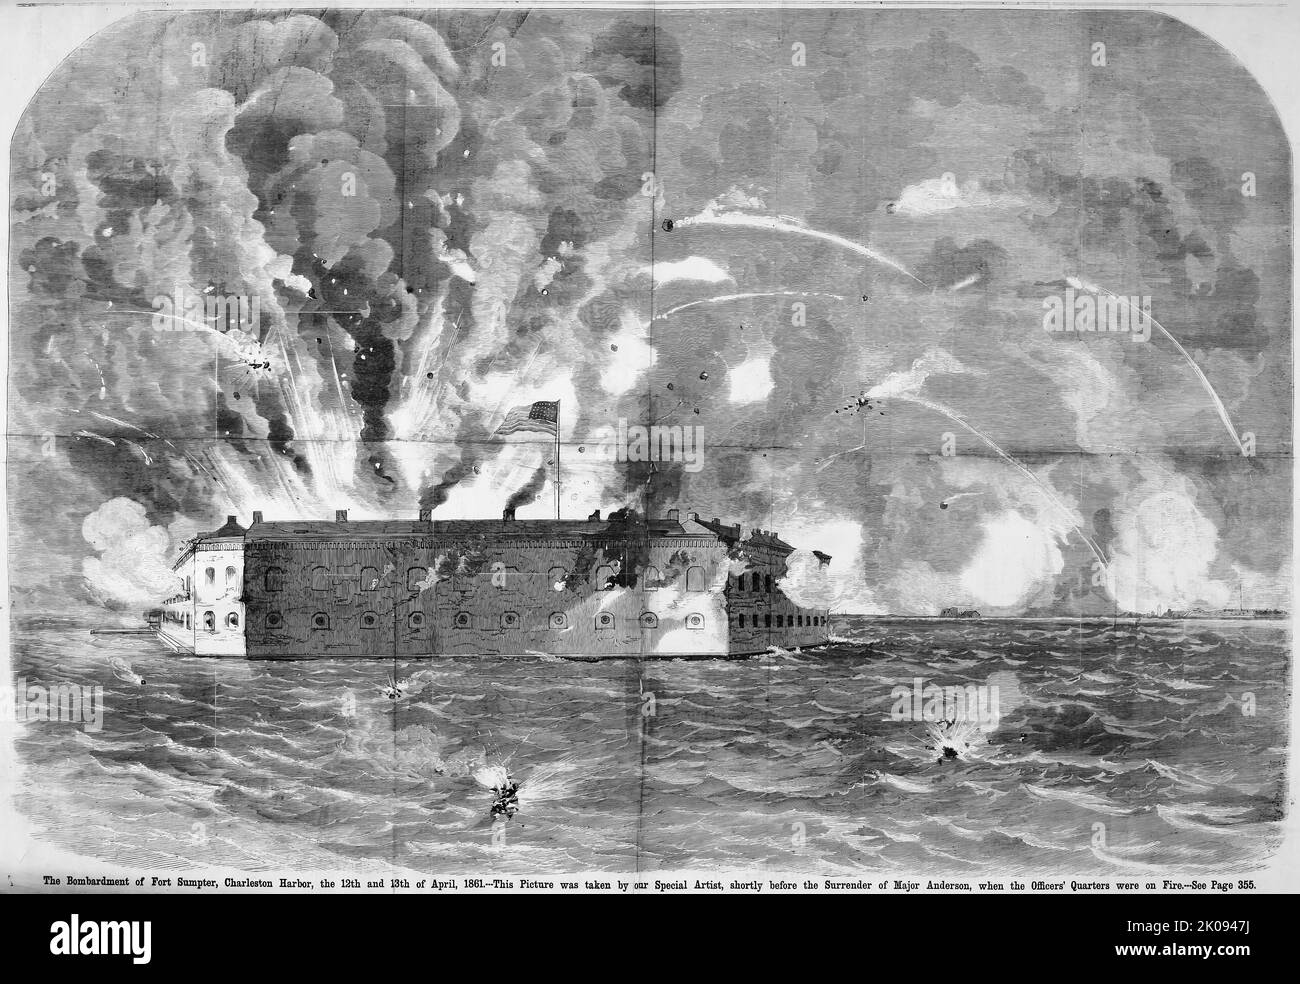 The Bombardment of Fort Sumter, Charleston Harbor, South Carolina, April 12th and 13th, 1861. Battle of Fort Sumter in the American Civil War. 19th century illustration from Frank Leslie's Illustrated Newspaper Stock Photo